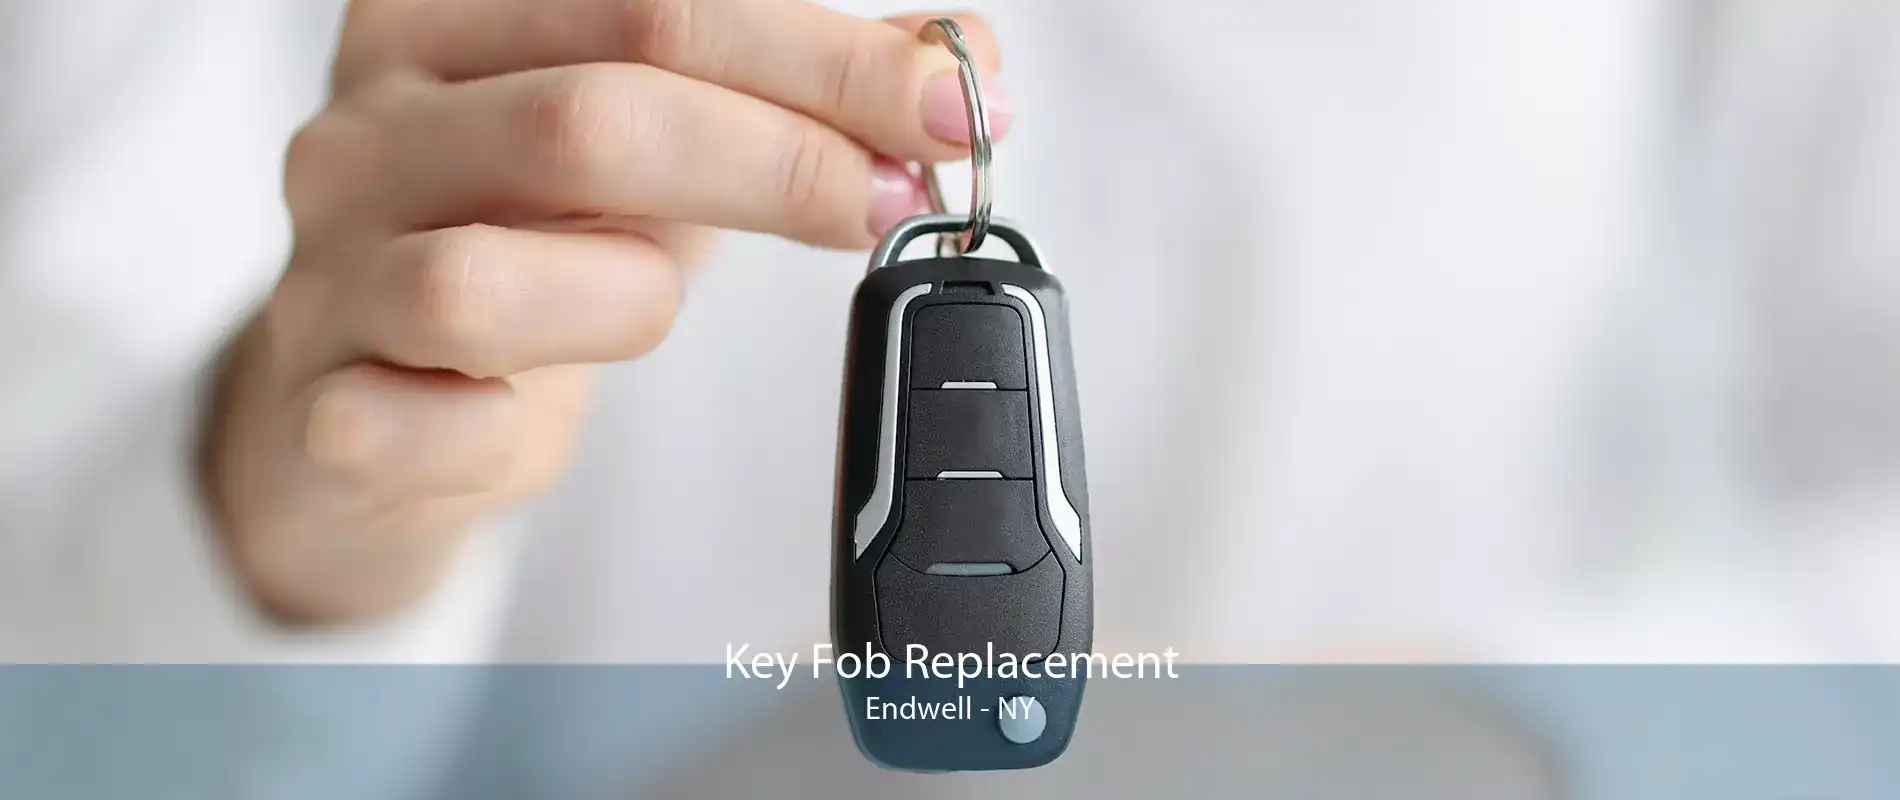 Key Fob Replacement Endwell - NY